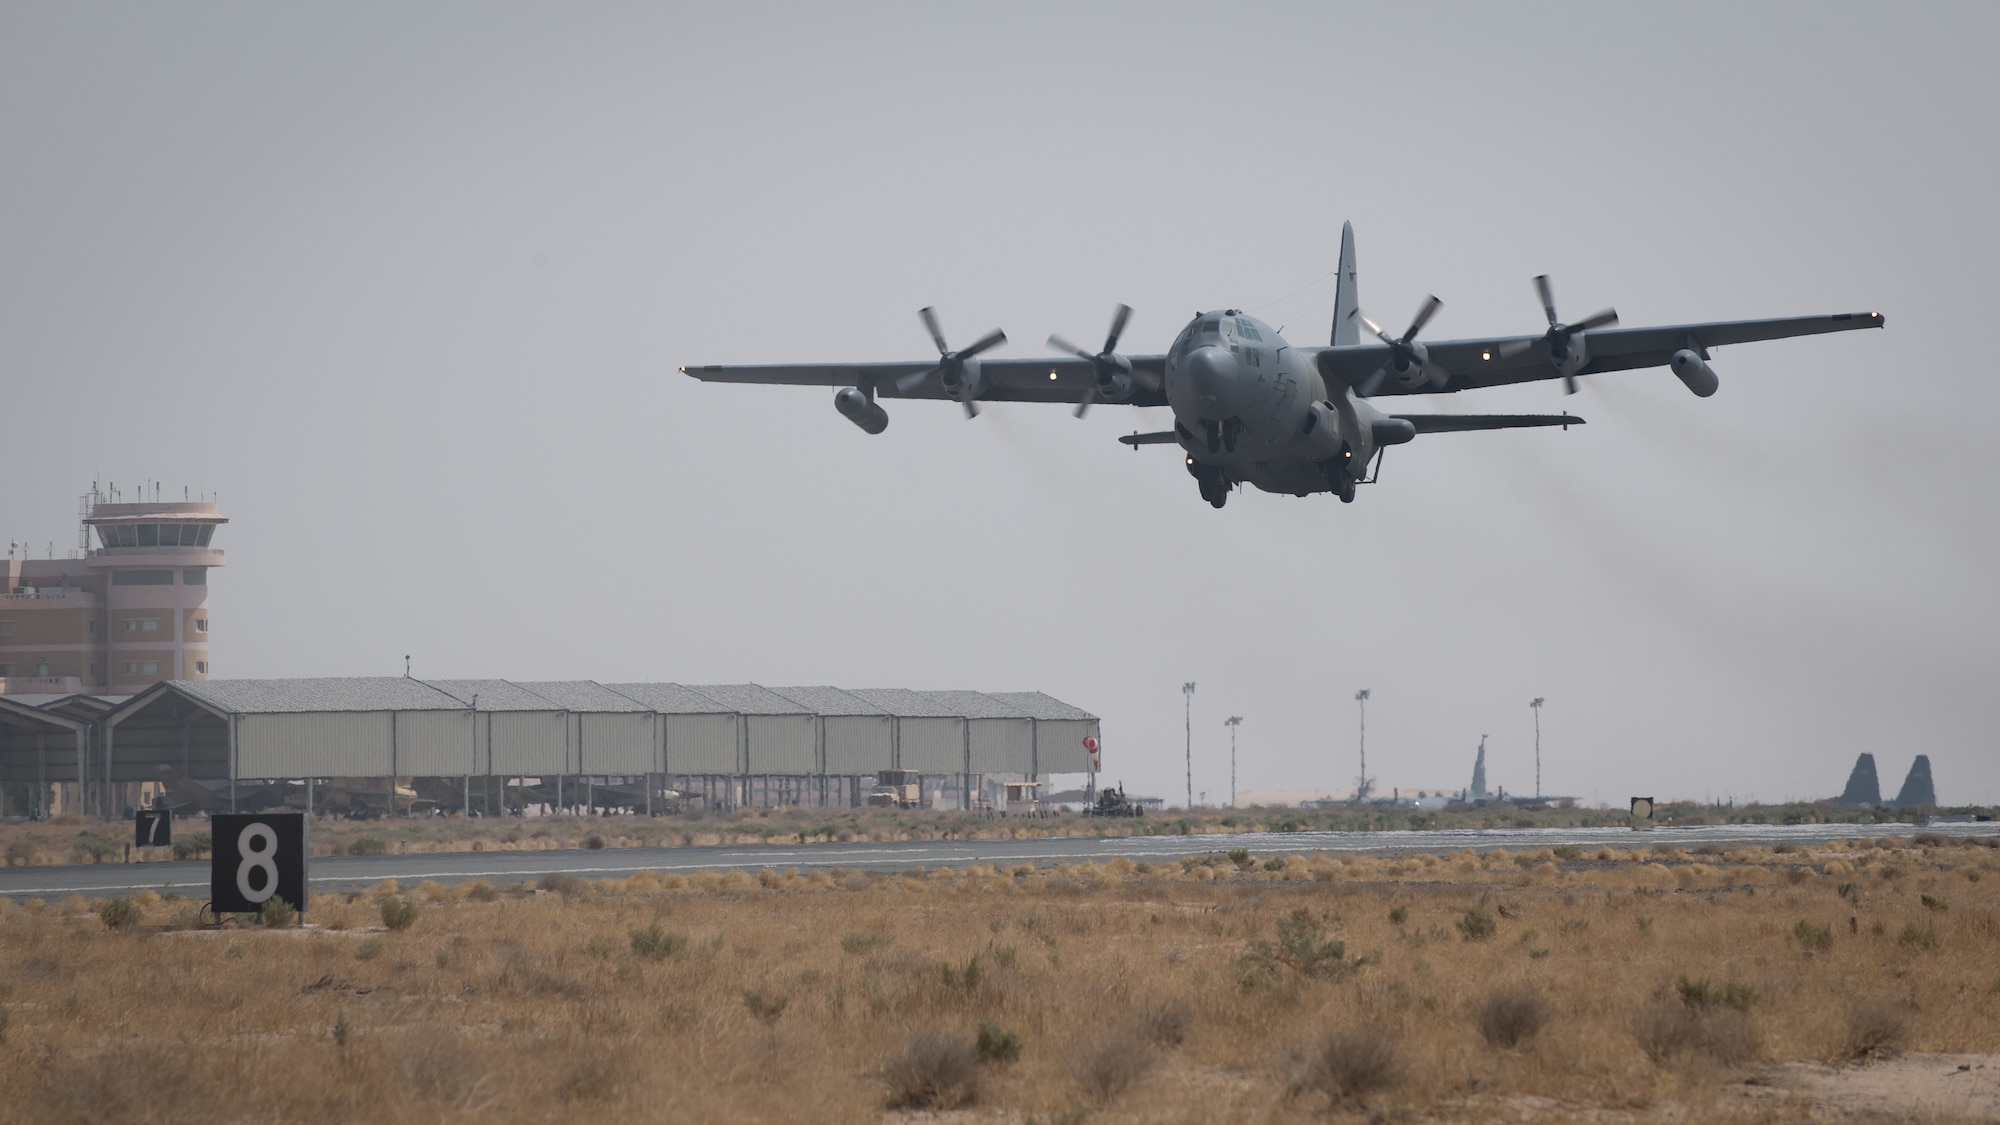 A U.S. Air Force EC-130H Compass Call aircraft lifts off to depart Ali Al Salem Air Base, Kuwait, Oct. 2, 2019. The aircraft's departure coincides with the inactivation of the 43rd Expeditionary Electronic Combat Squadron on Sept. 30, 2019. (U.S. Air Force photo by Tech. Sgt. Daniel Martinez)